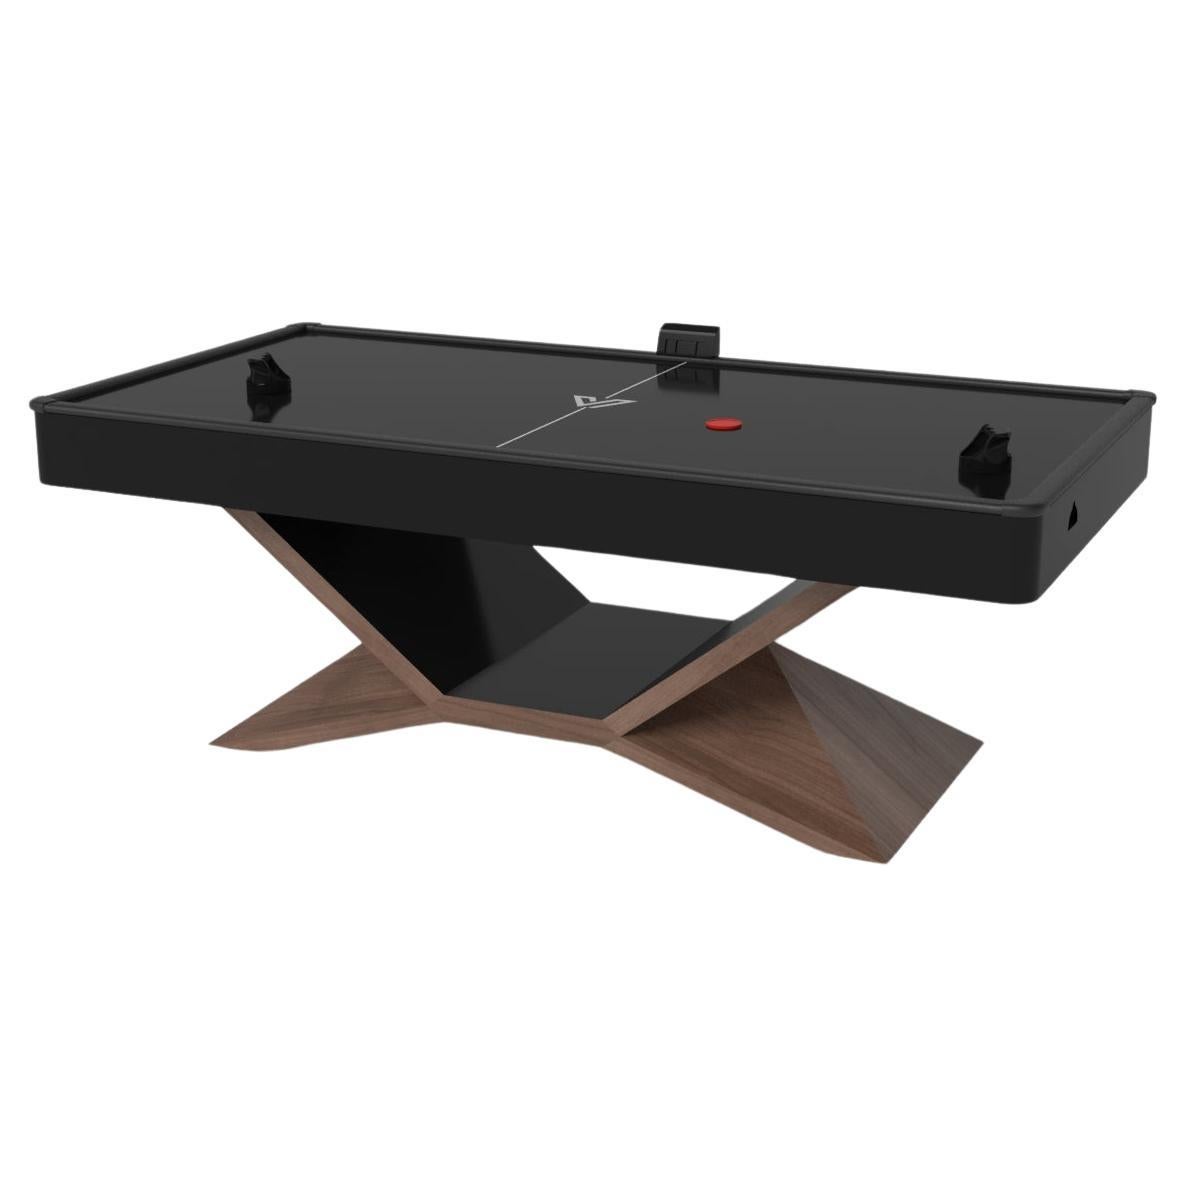 Elevate Customs Kors Air Hockey Tables / Solid Walnut Wood in 7' - Made in USA For Sale